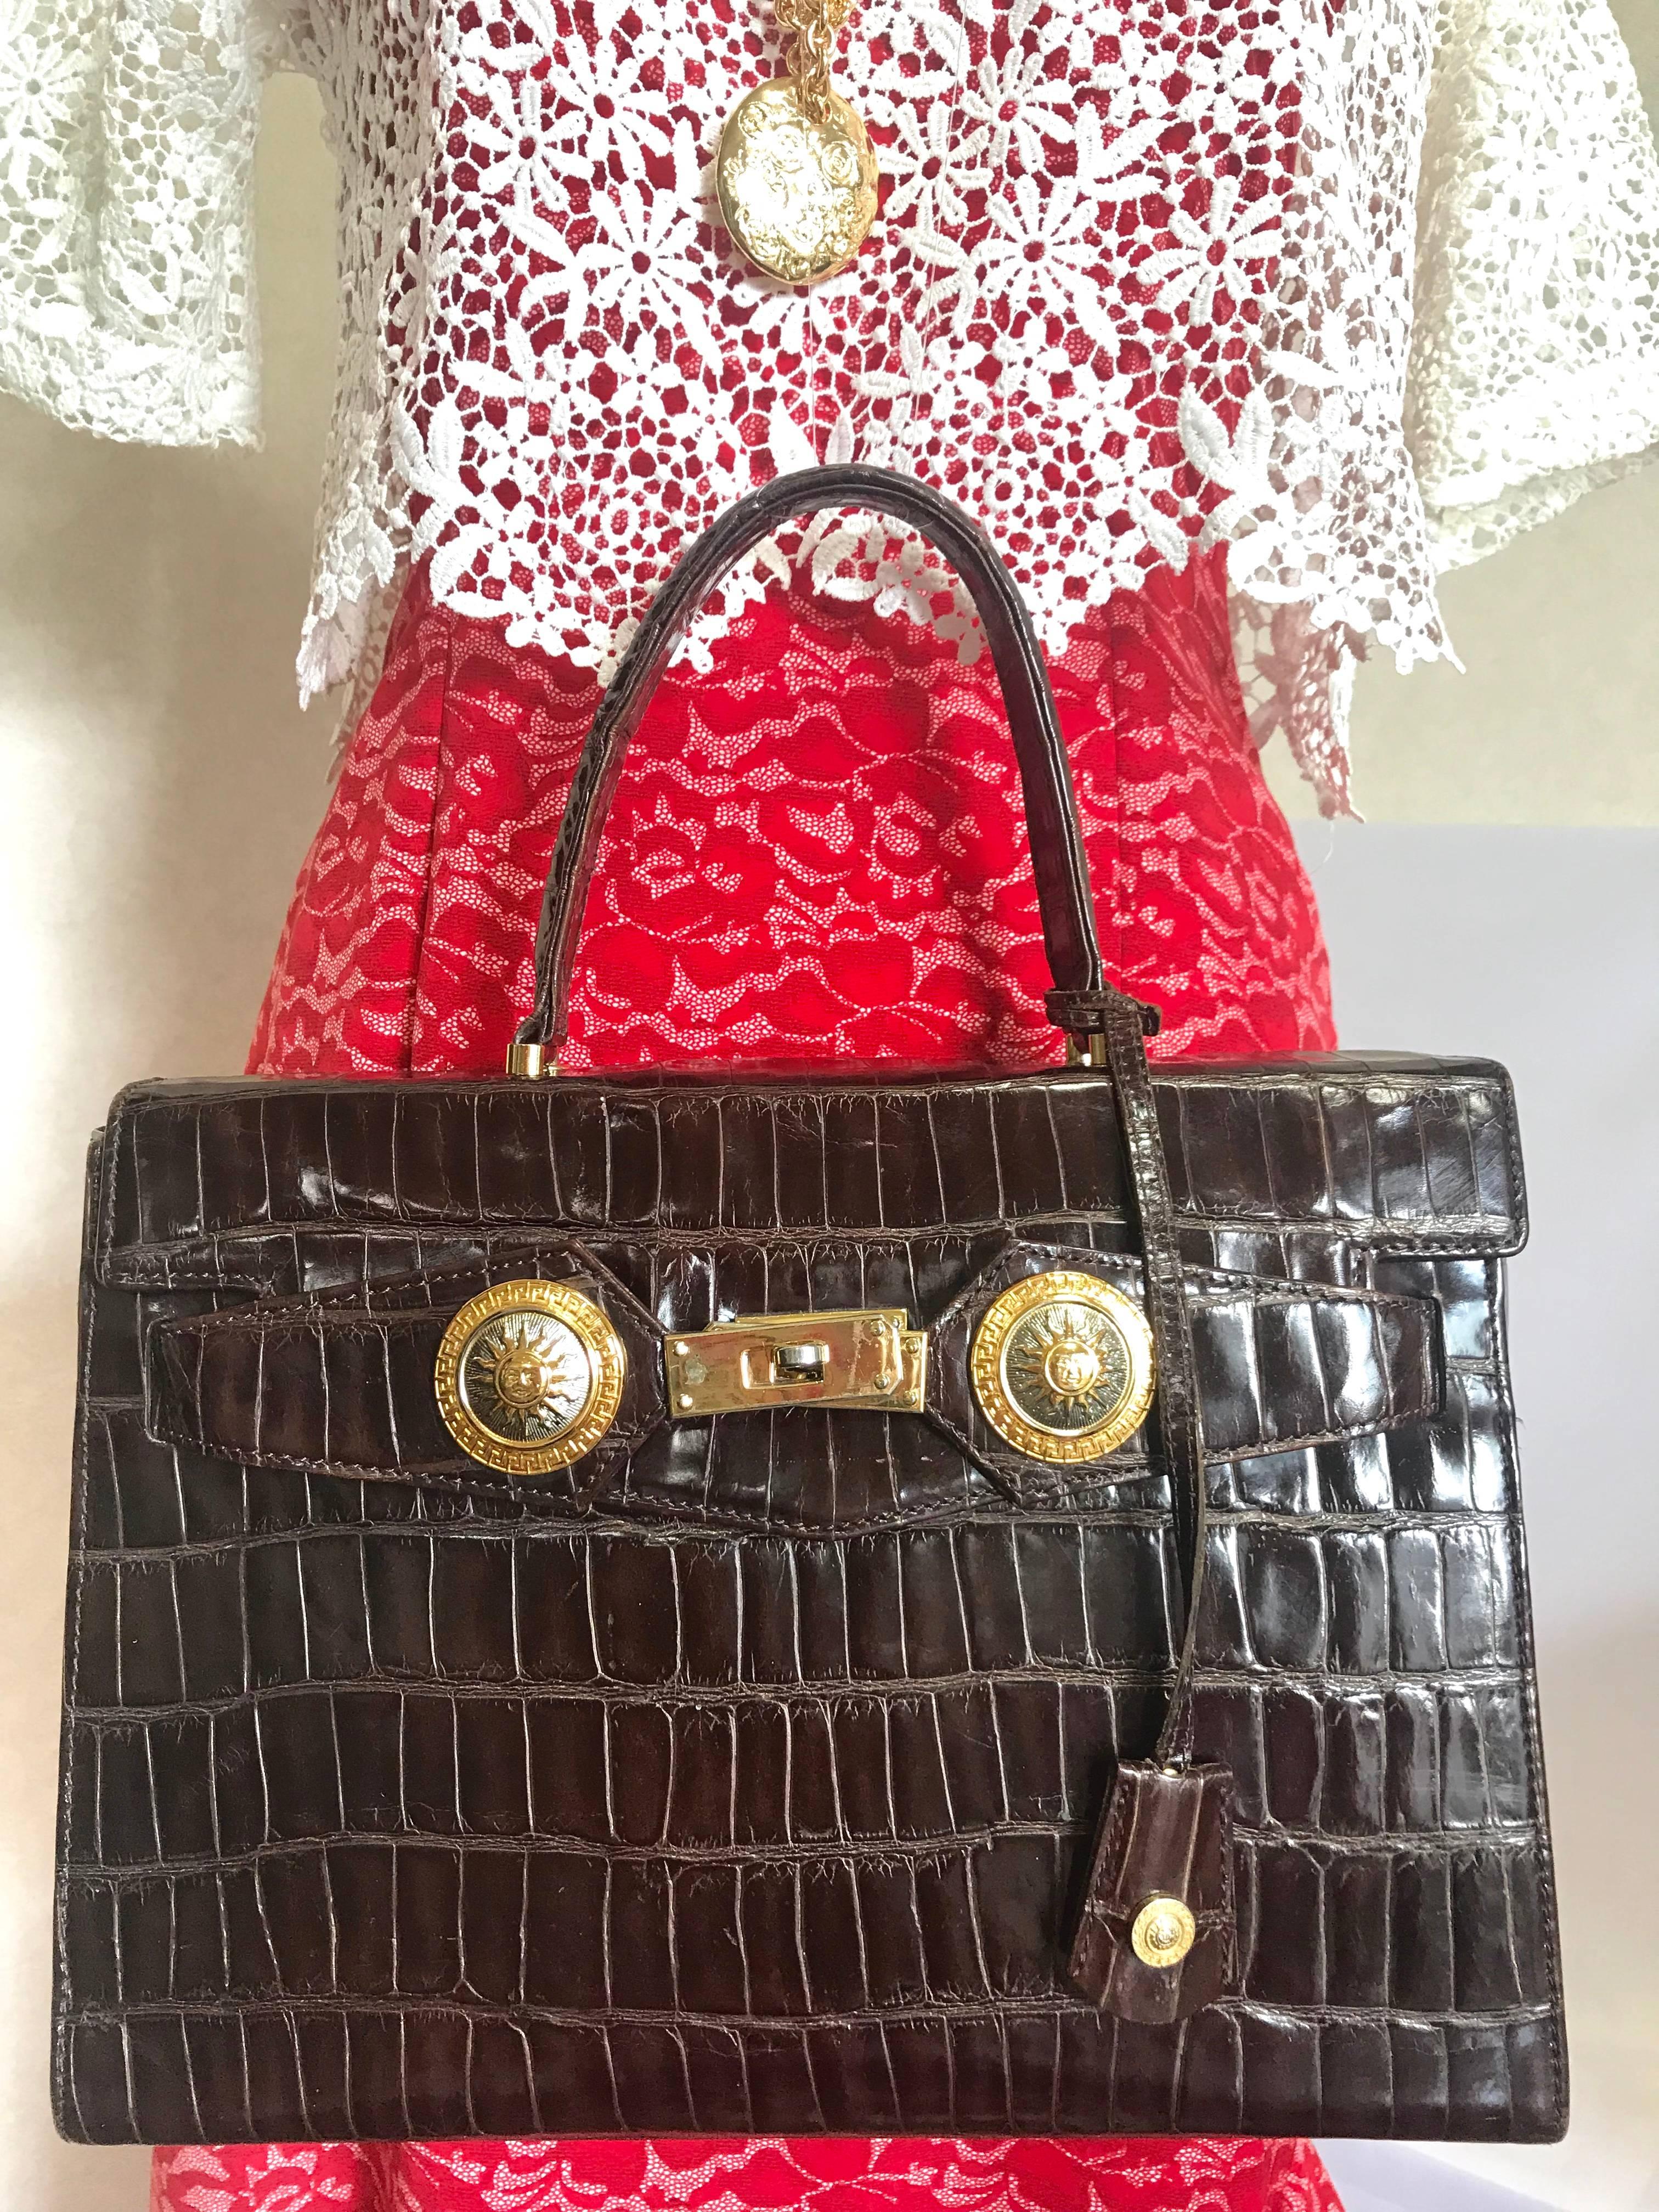 1990s. Vintage Gianni Versace dark brown croc embossed leather Kelly style bag with Medallion Sunburst motifs. Gorgeous masterpiece. Must have bag.

This is one sophisticated masterpiece from GIANNI VERSACE in the old era. 
If you are looking for